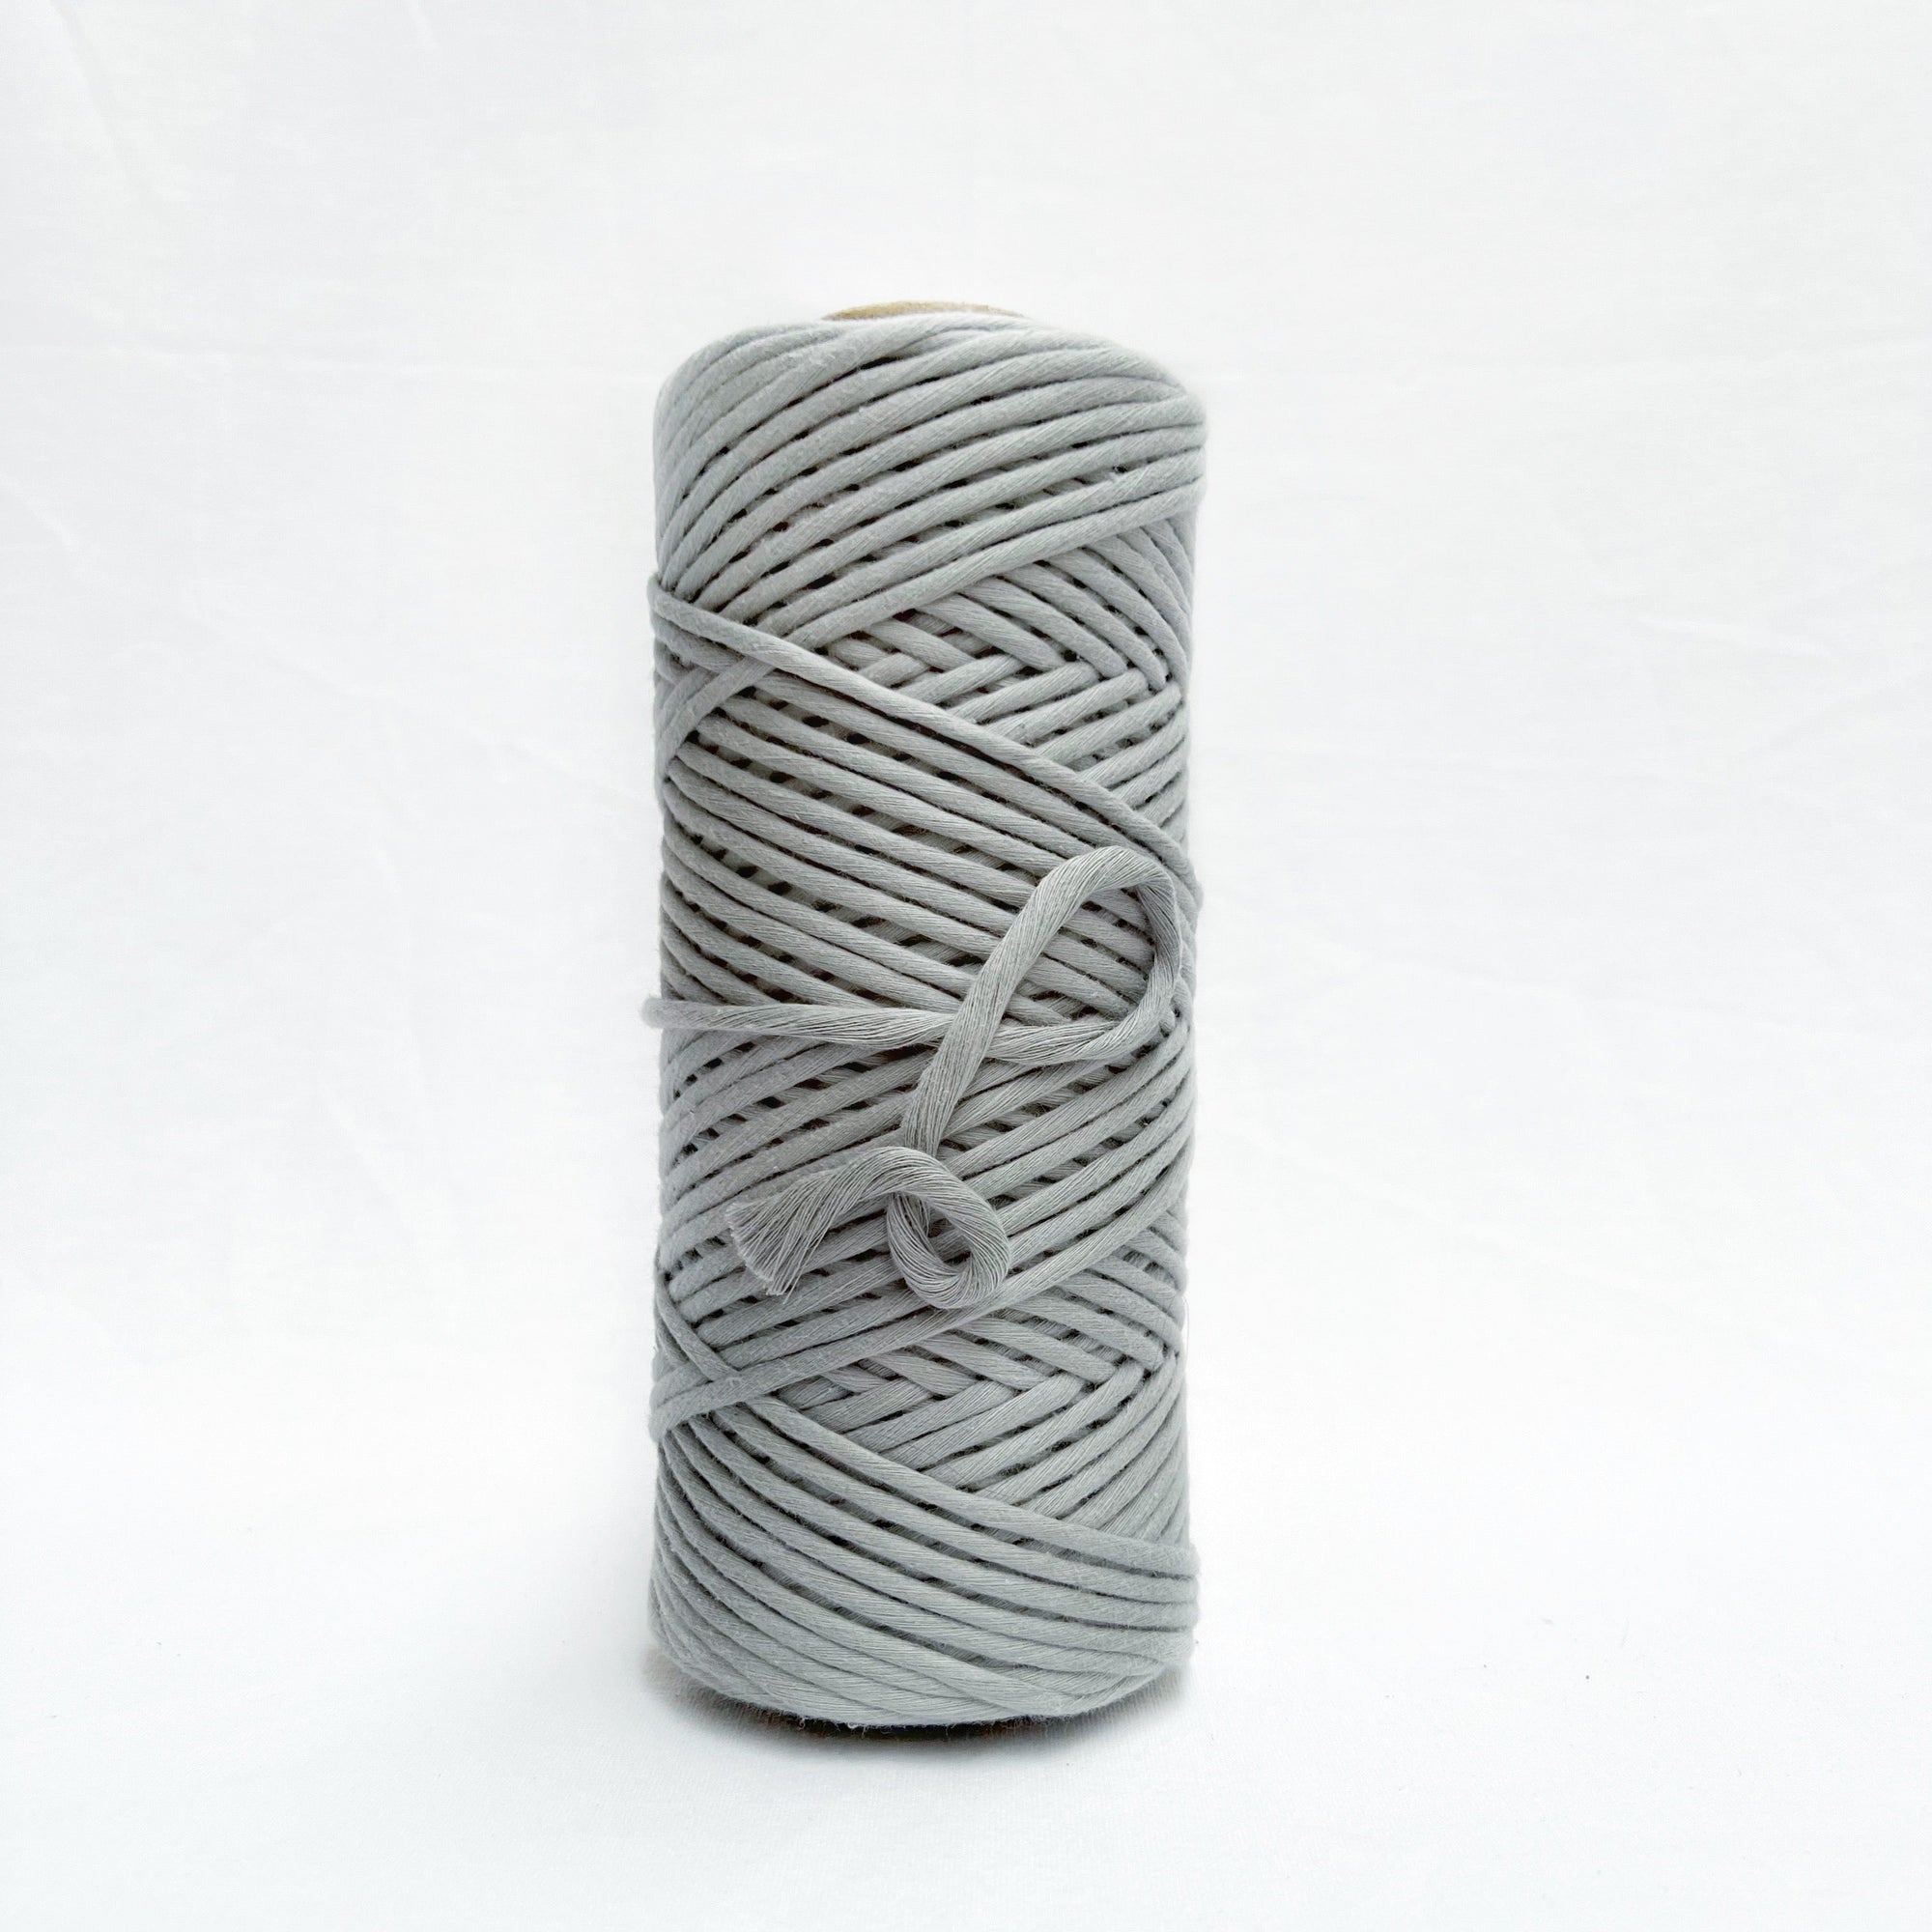 mary maker studio cloud 9 macrame cotton string 4mm 500g roll used in macrame weaving and diy handmade craft